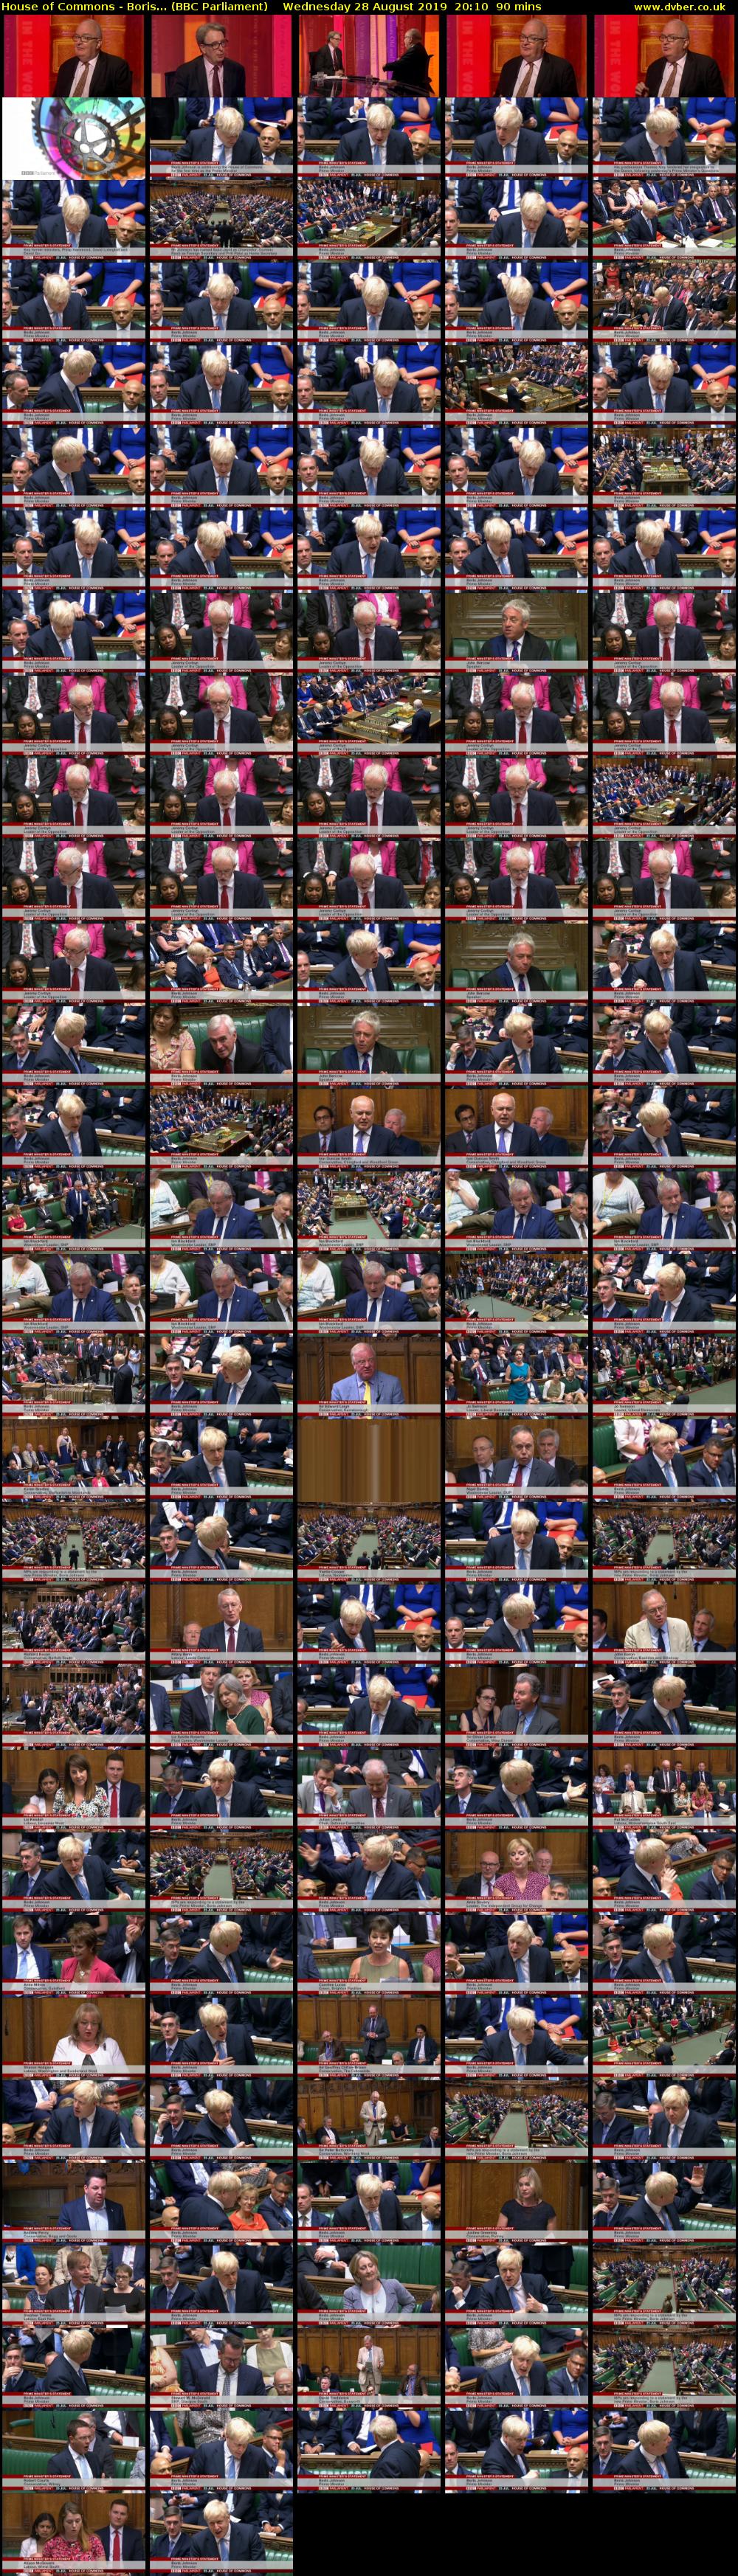 House of Commons - Boris... (BBC Parliament) Wednesday 28 August 2019 20:10 - 21:40